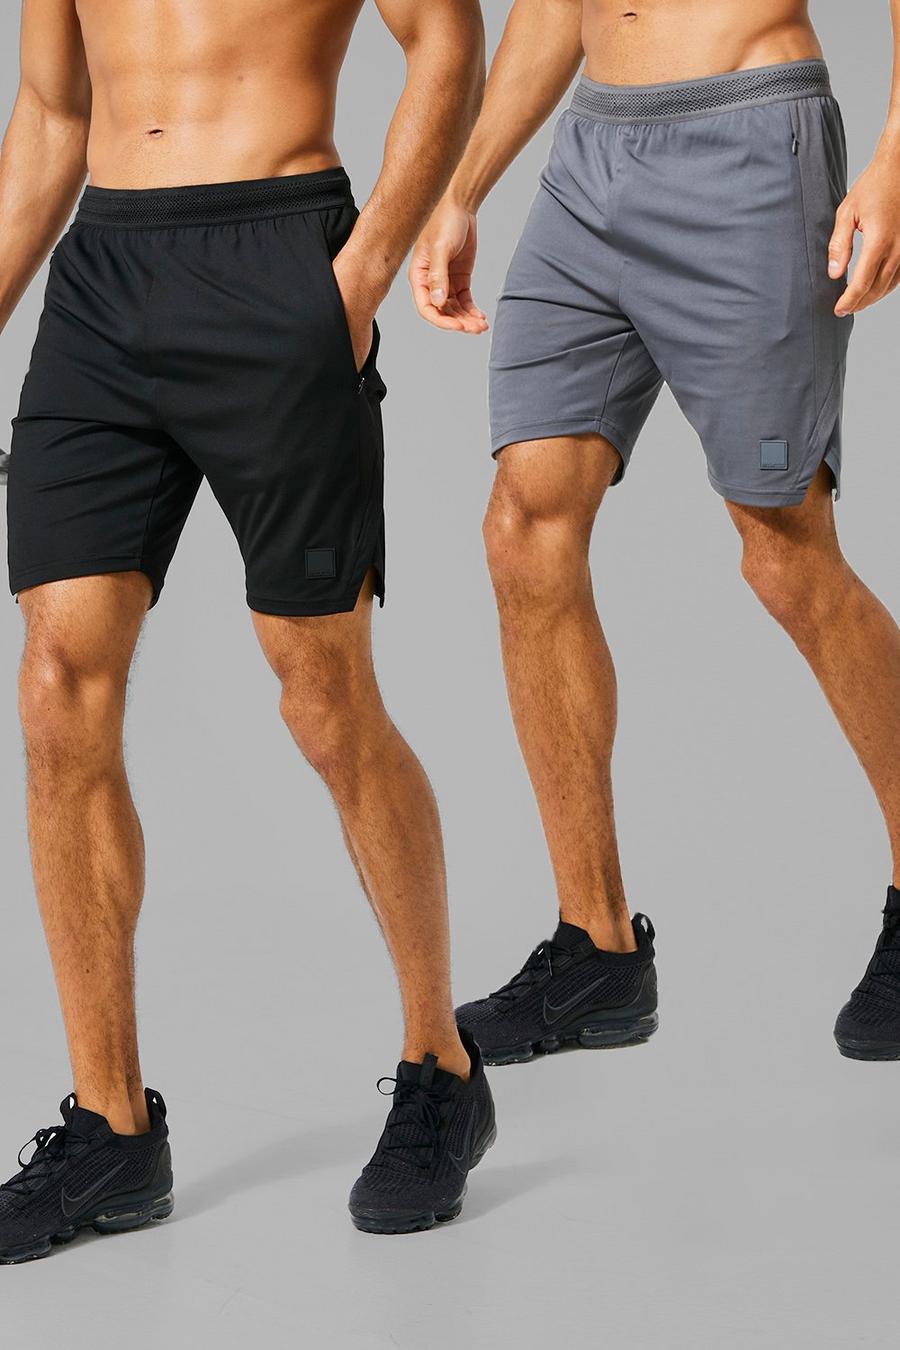 Tryb Men Men Sport Performance Active Long Leg Compression Shorts Trunk - 2  pack Brief - Buy Tryb Men Men Sport Performance Active Long Leg Compression  Shorts Trunk - 2 pack Brief